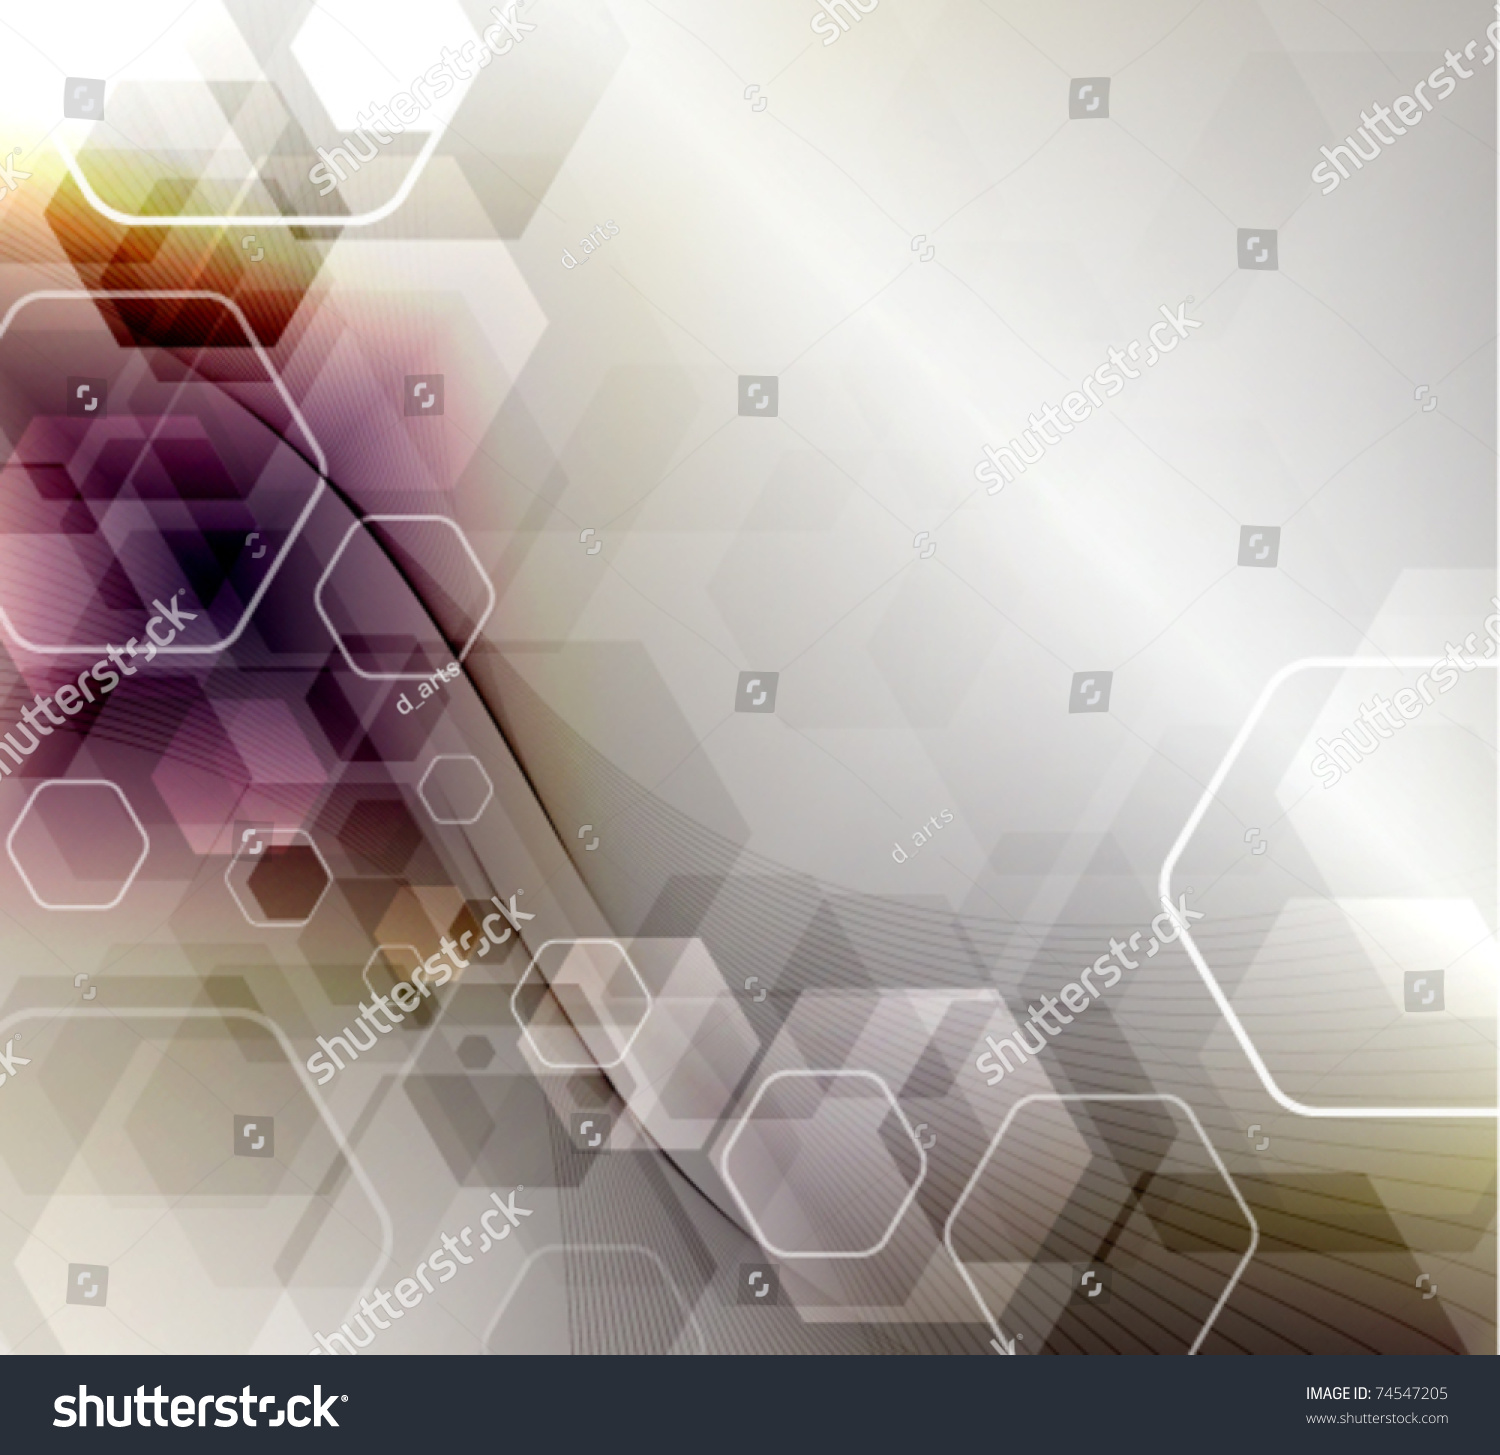 Vector Abstract Backgrounds In Techno Style - 74547205 : Shutterstock